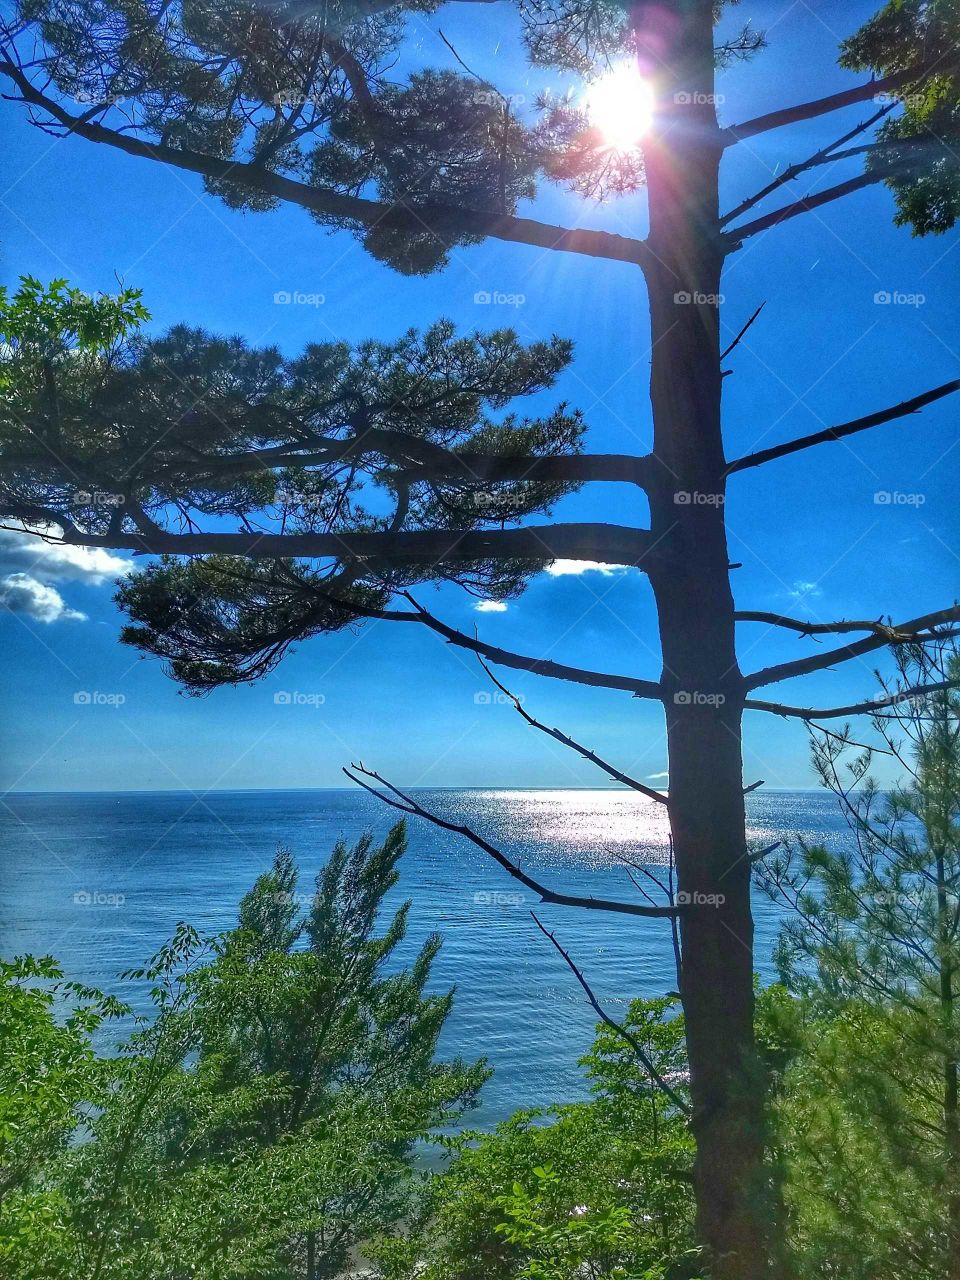 Lake Michigan from the top of doing and a pine tree